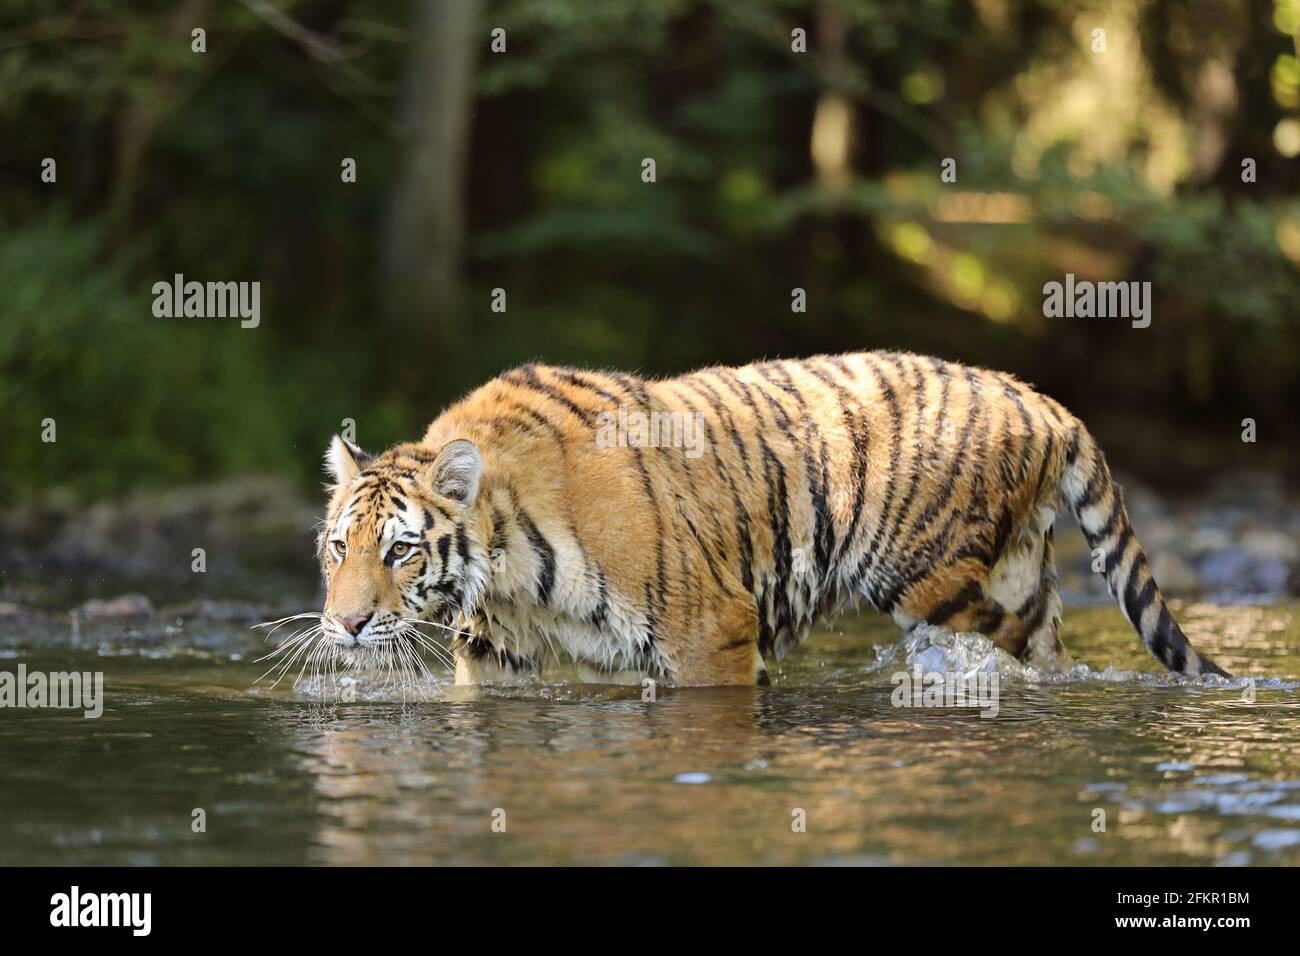 The Siberian tiger Panthera tigris Tigris, or Amur tiger Panthera tigris altaica in the forest walking in a water. Tiger with green background Stock Photo